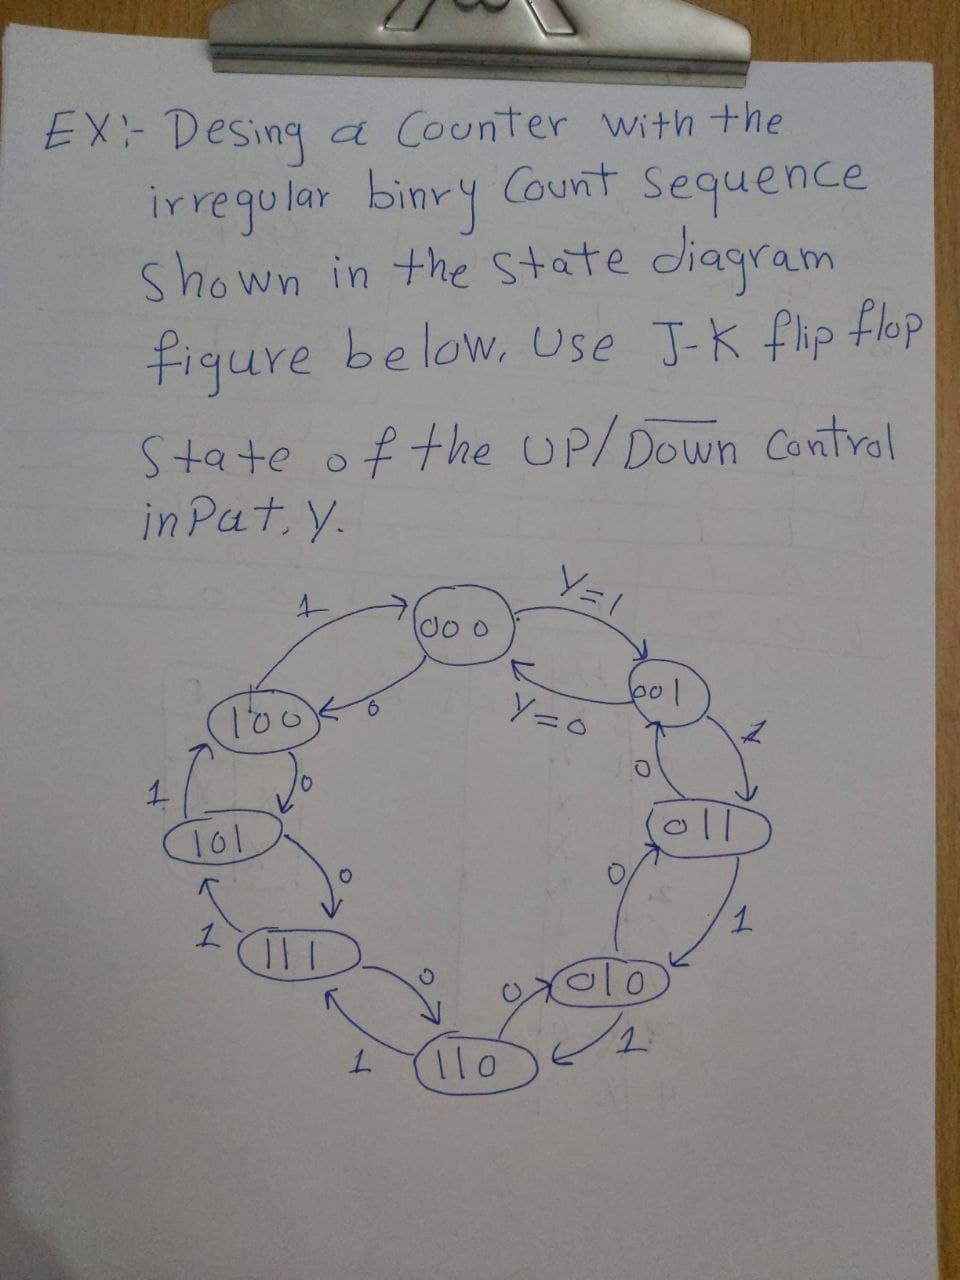 EX:- Desing a Counter with the
irregular binry Count Sequence
Shown in the state diagram
figure below. Use J-K flip flop
State of the UP/Down Control
in Pat. y.
1
101
1
1
100
11 1
1
100 o
110
Y=1
Y = 0
bool
Xolo
oll
1